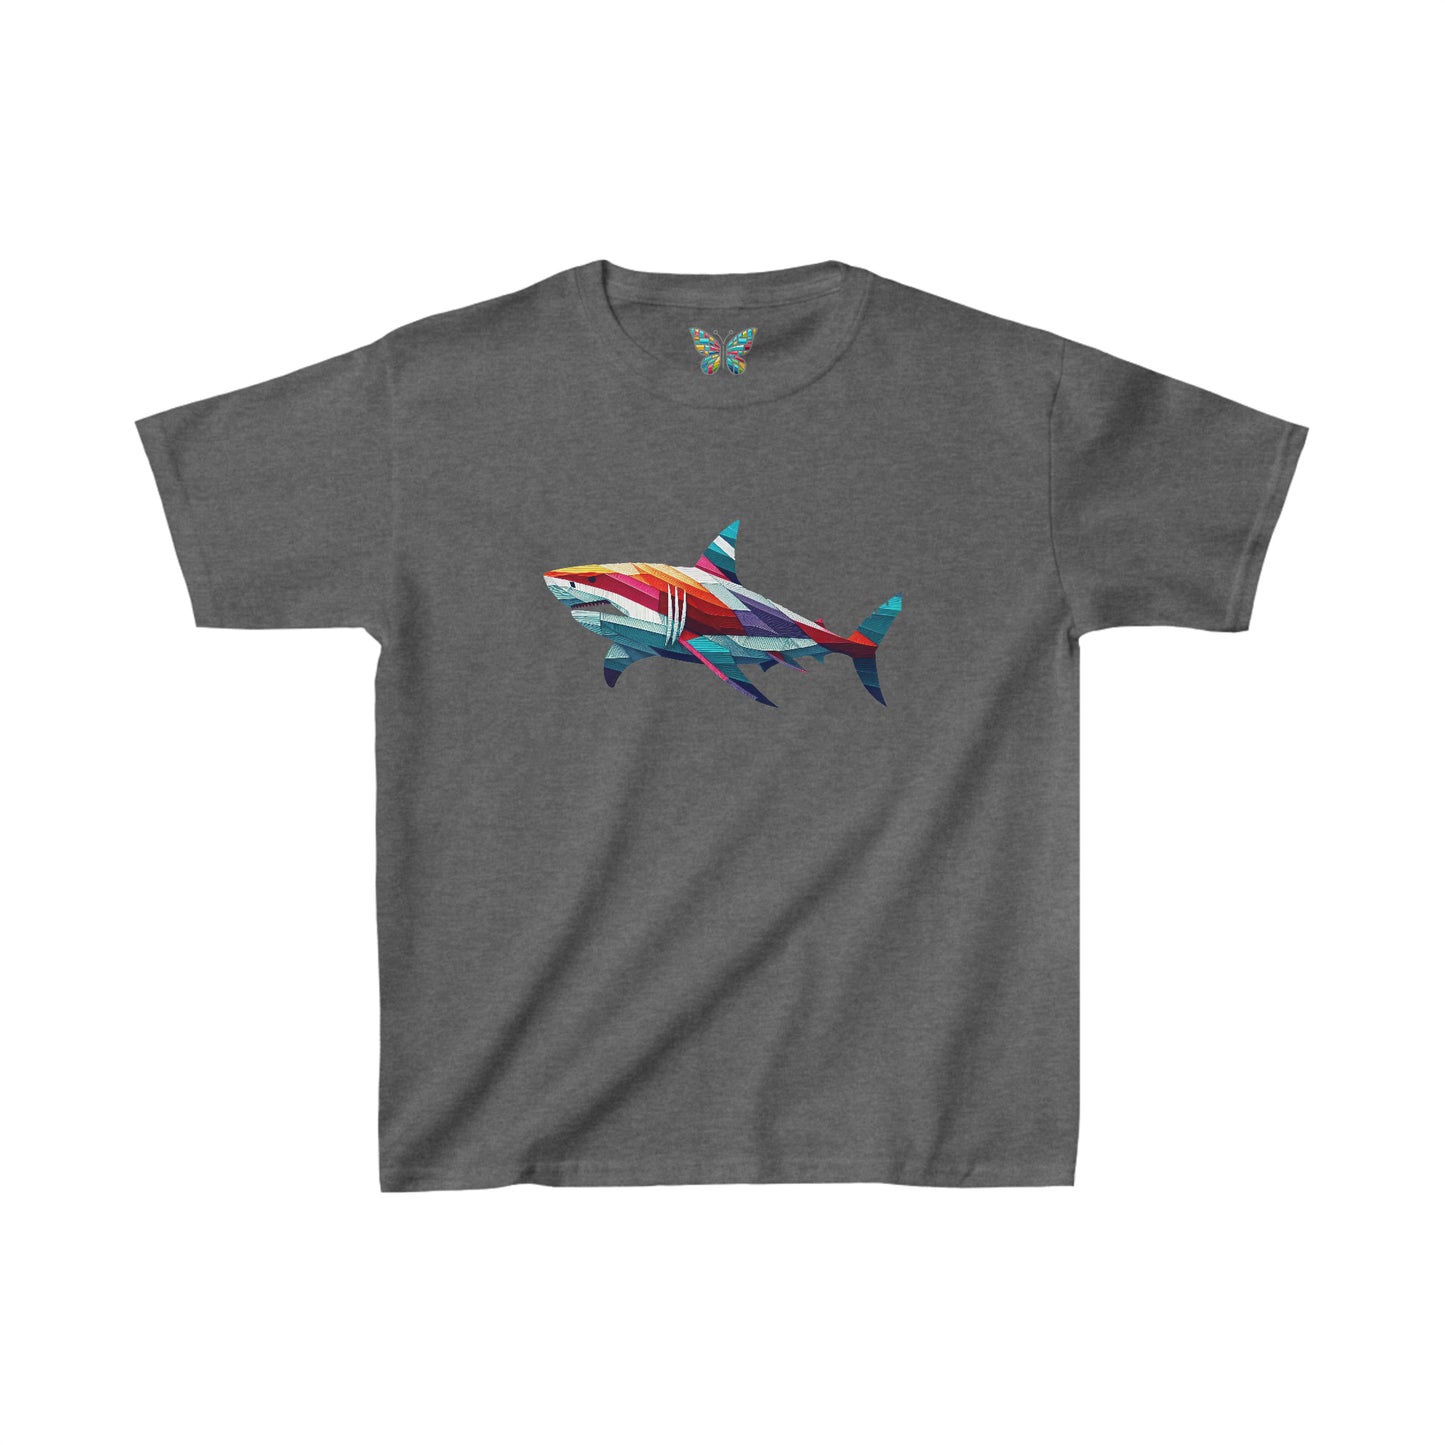 Great White Shark Mysterime - Youth - Snazzle Tee